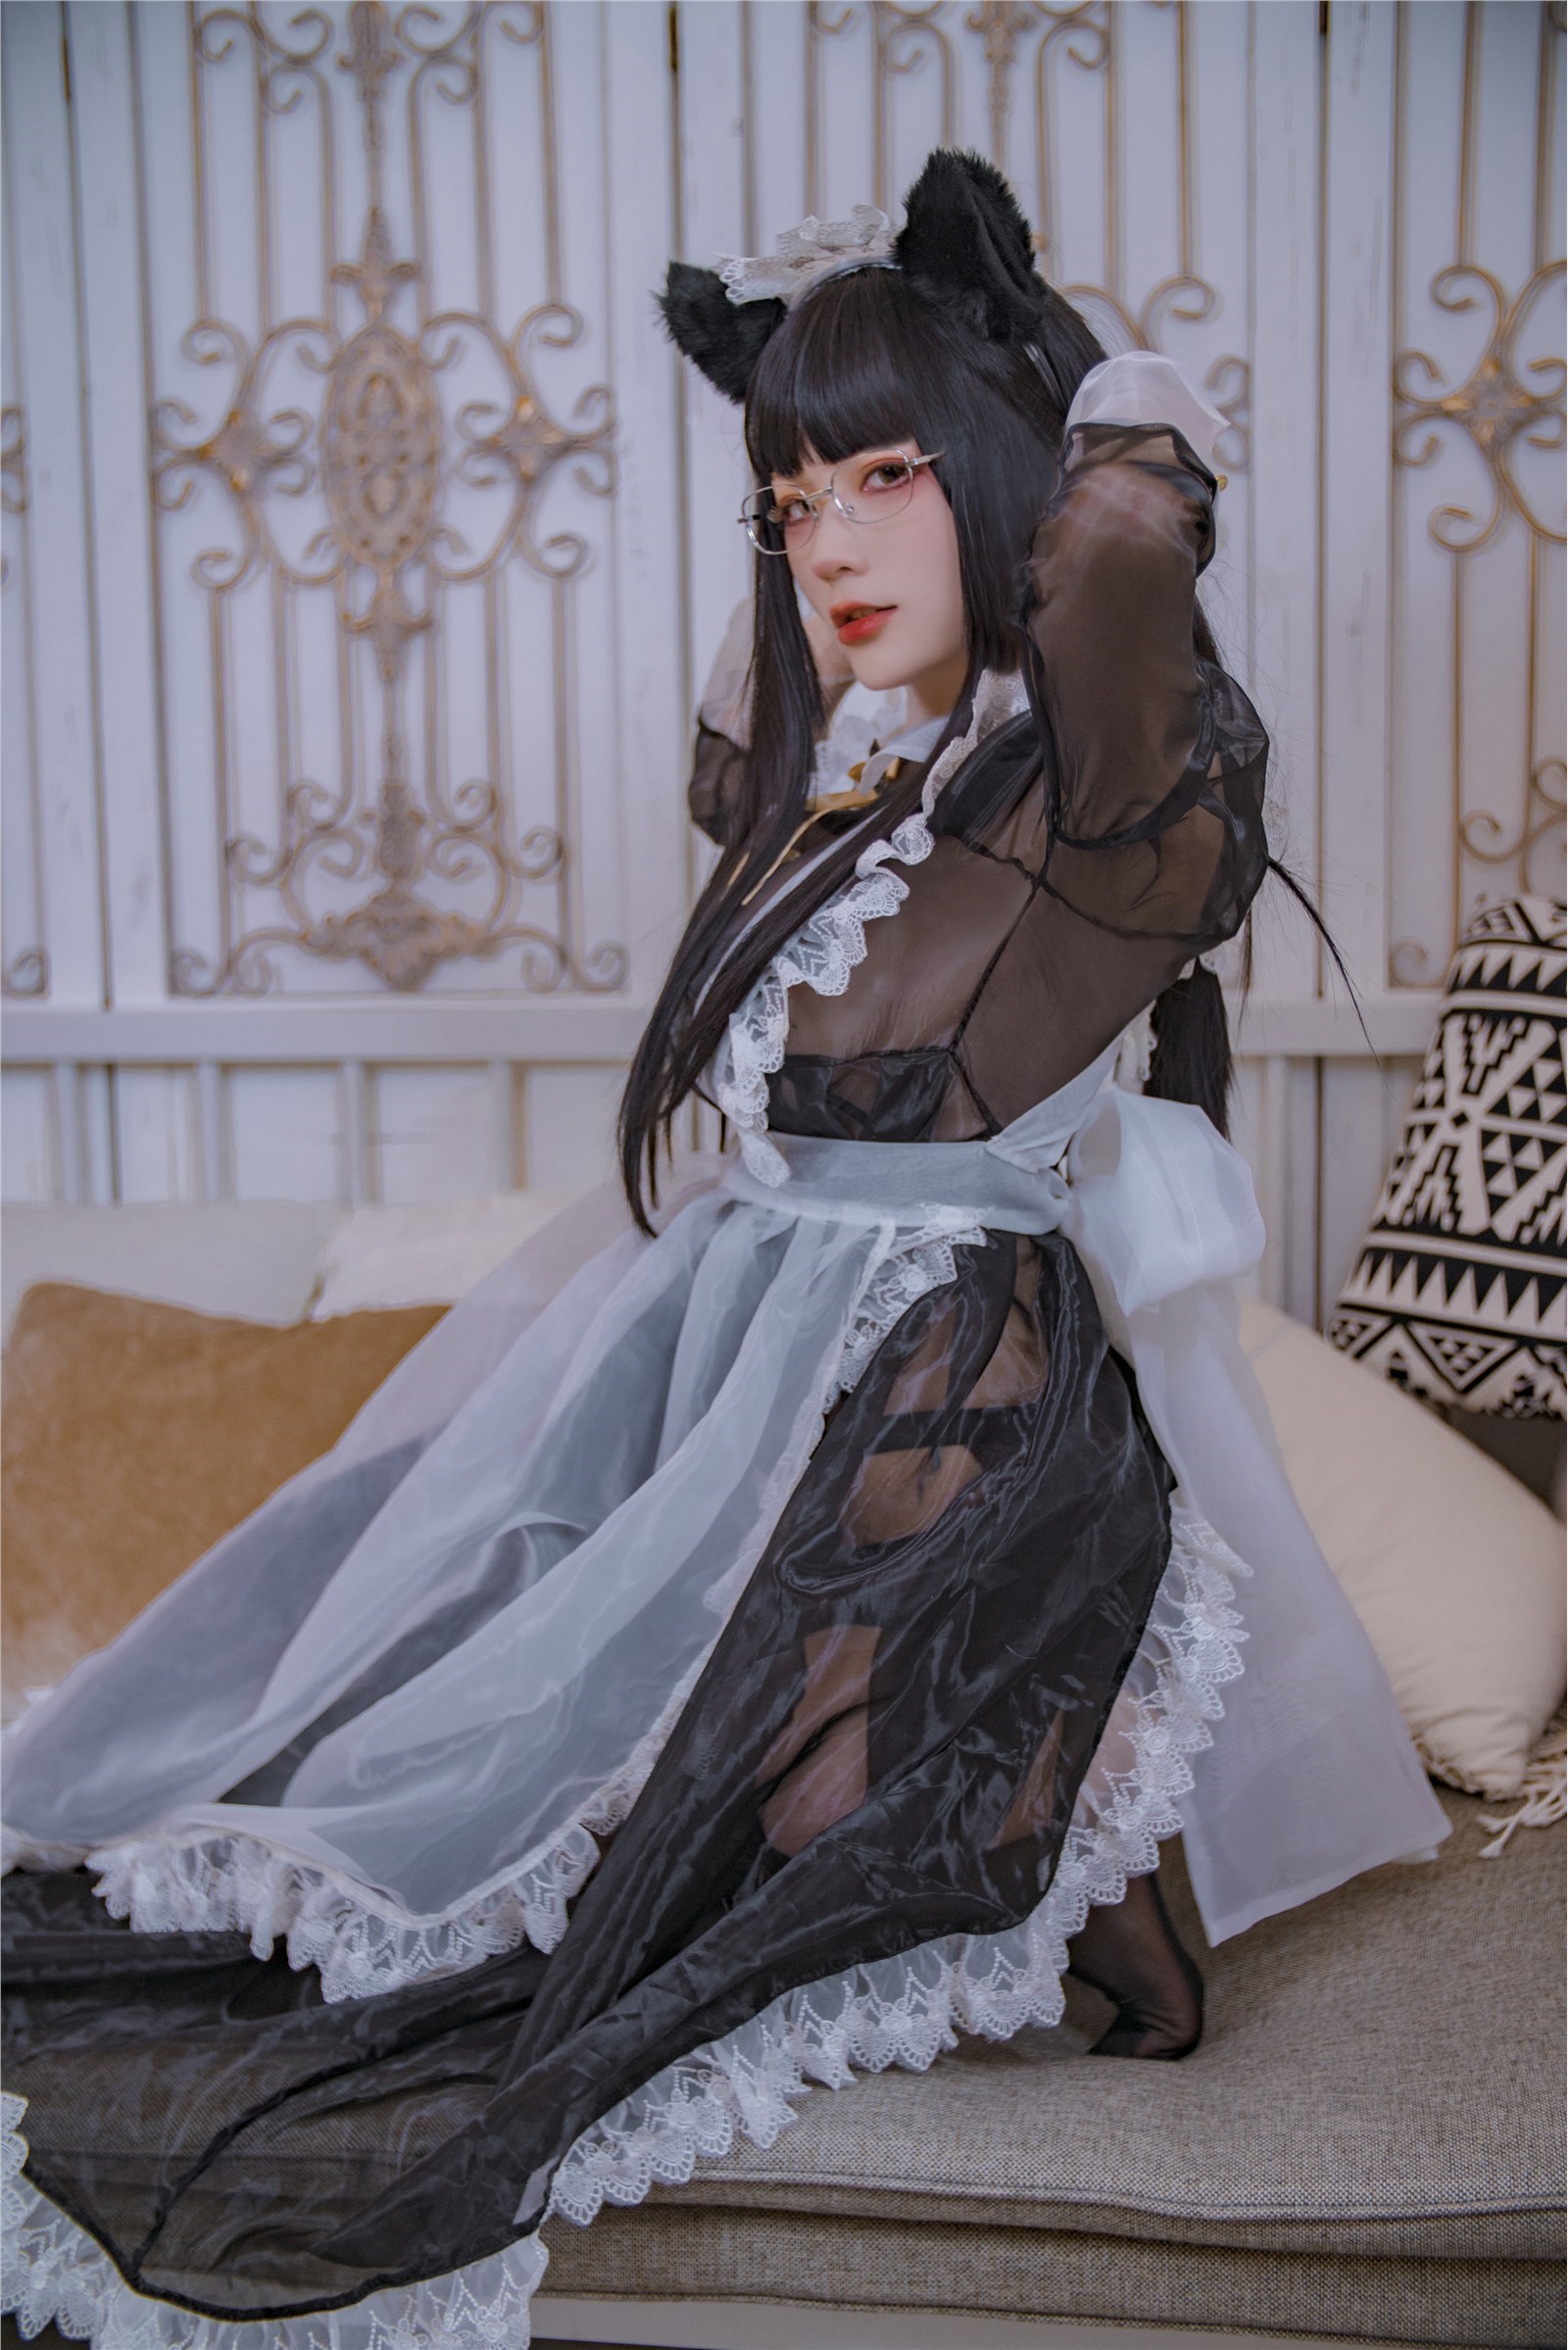 Cosplay cheese Wii - black transparent maid(15)